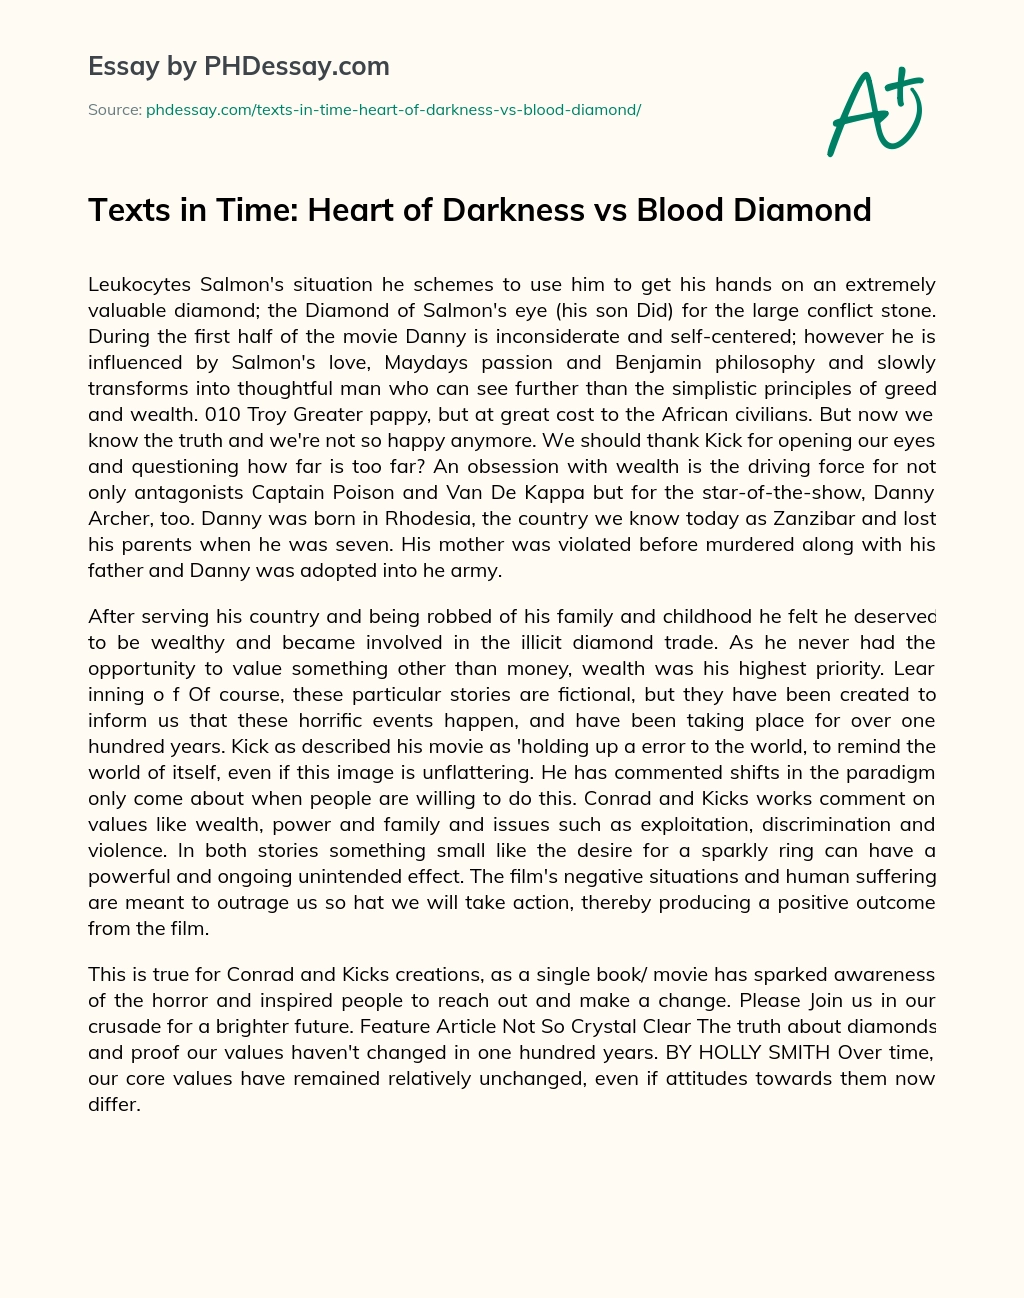 Texts in Time: Heart of Darkness vs Blood Diamond essay